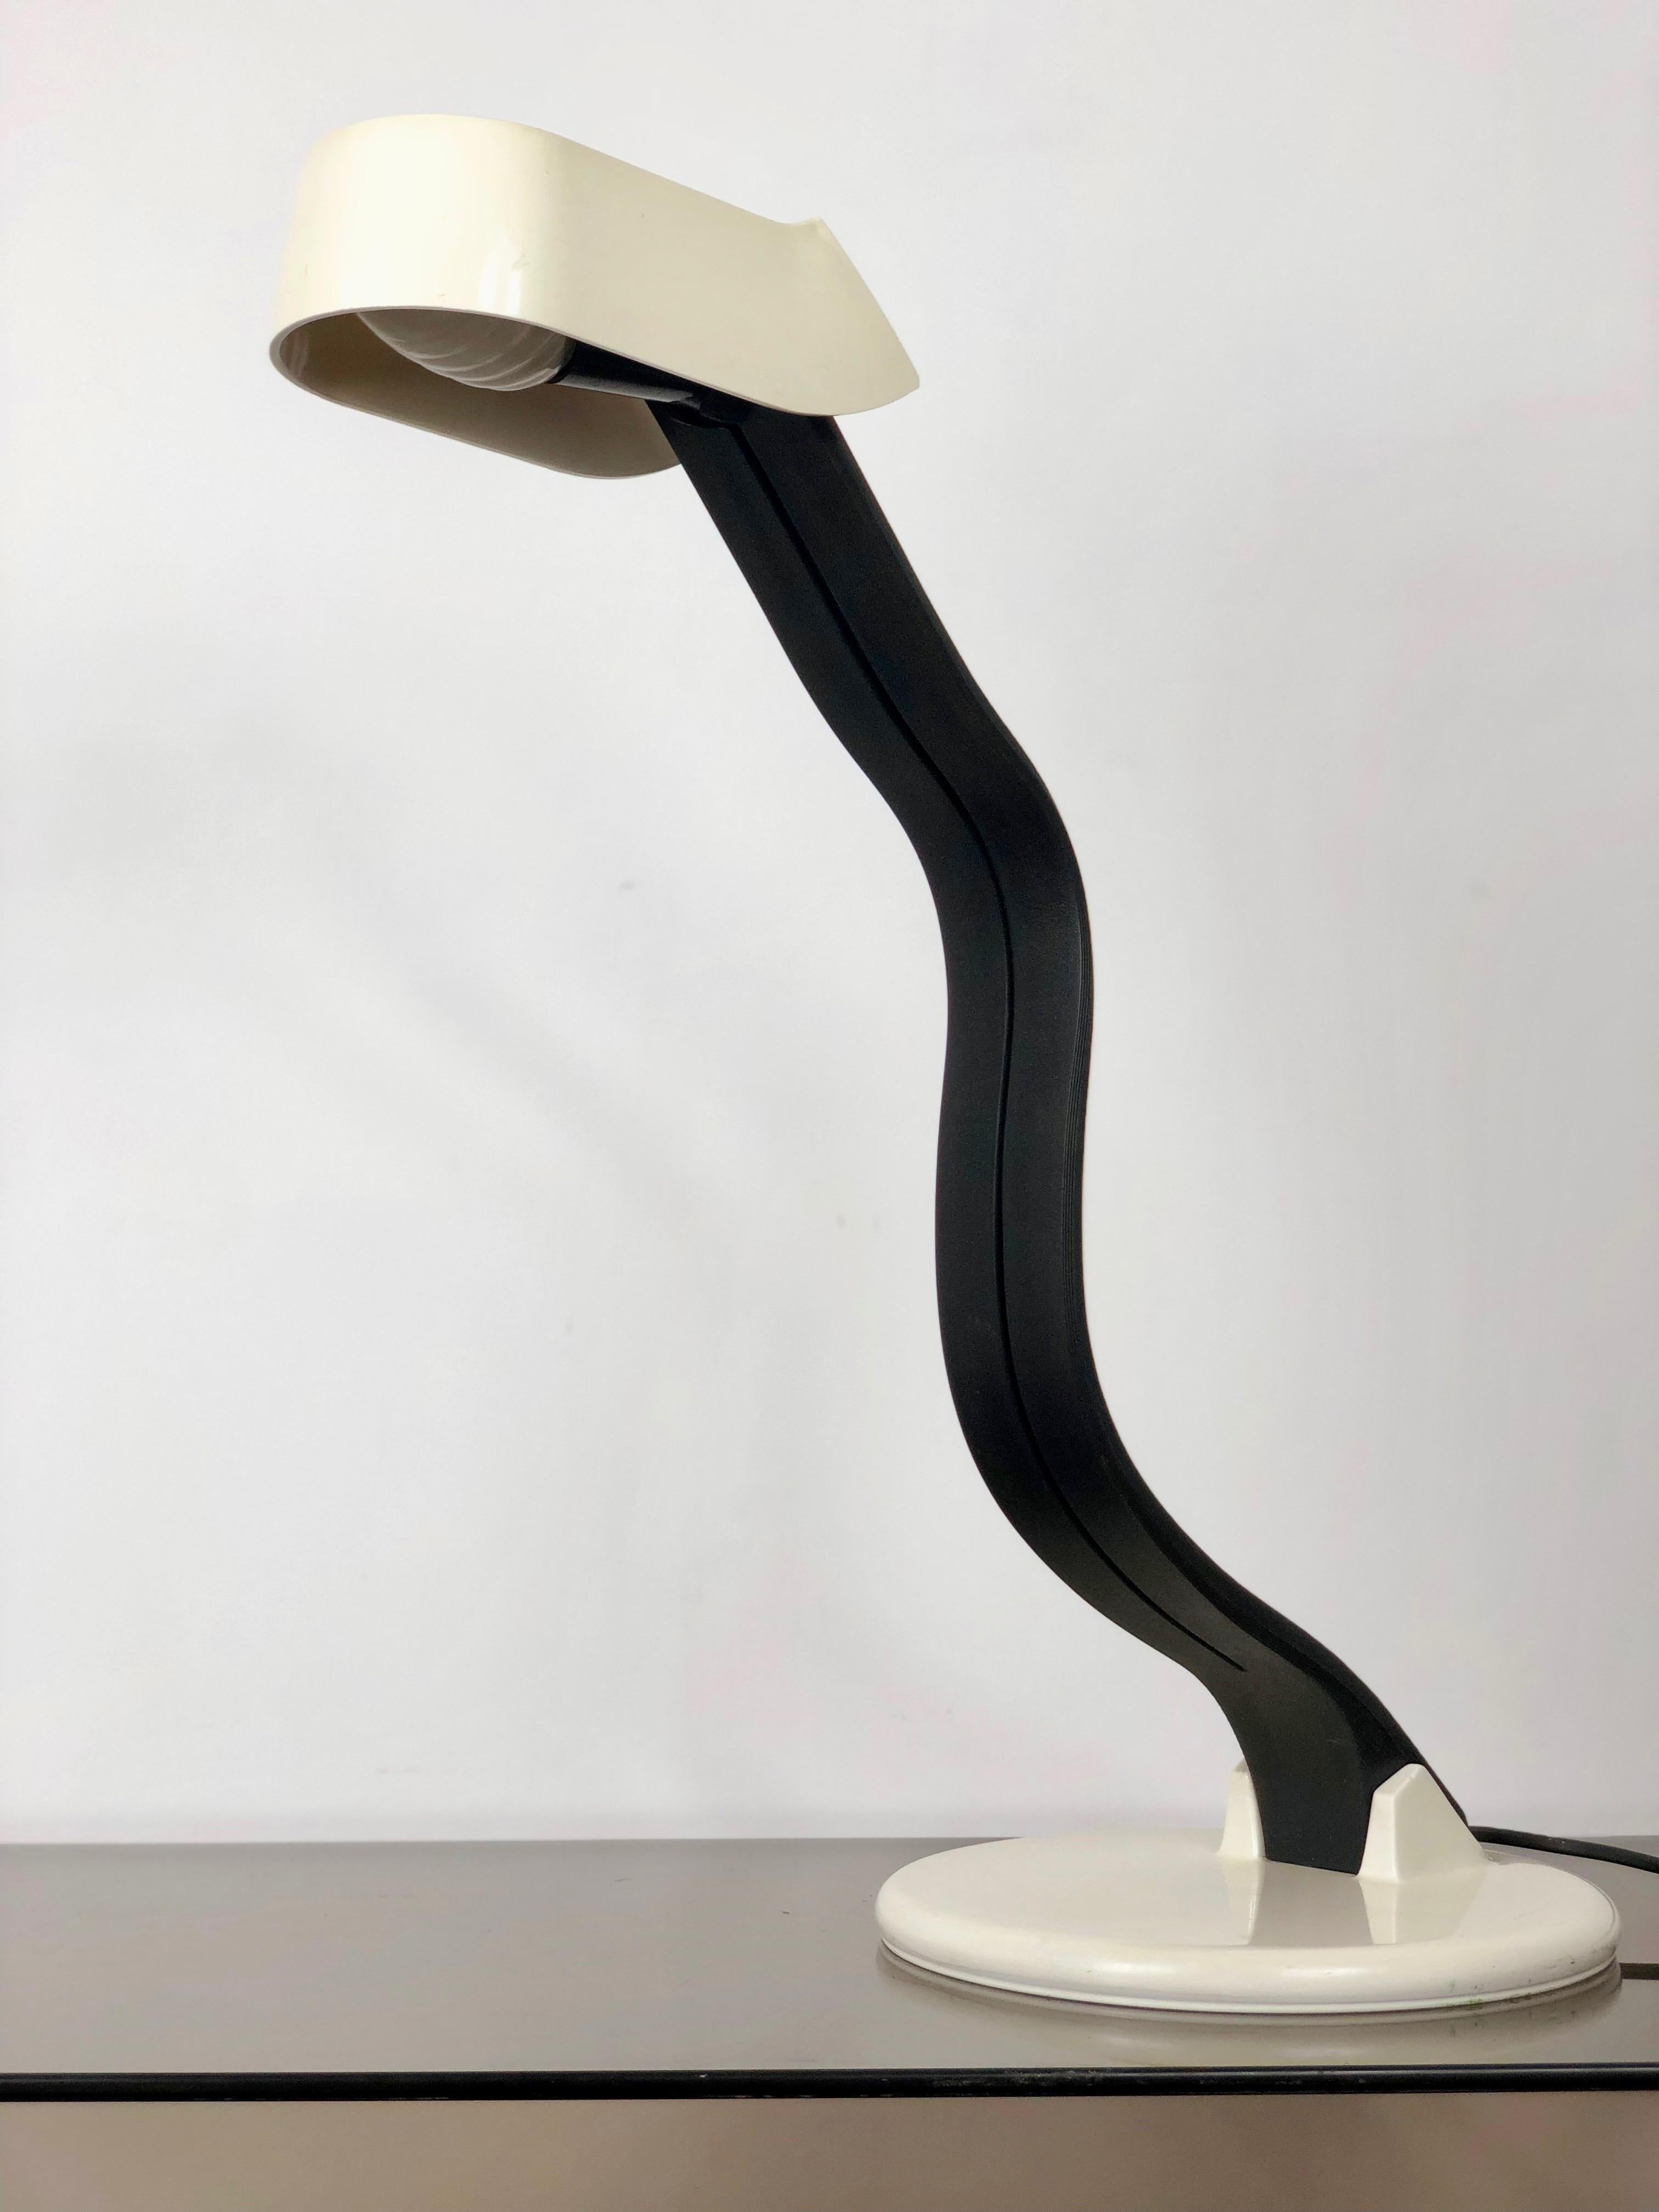 Bruno Gecchelin for Guzzini Adjustable 'Snoky' Table Lamp, Italy, 1970s For Sale 3